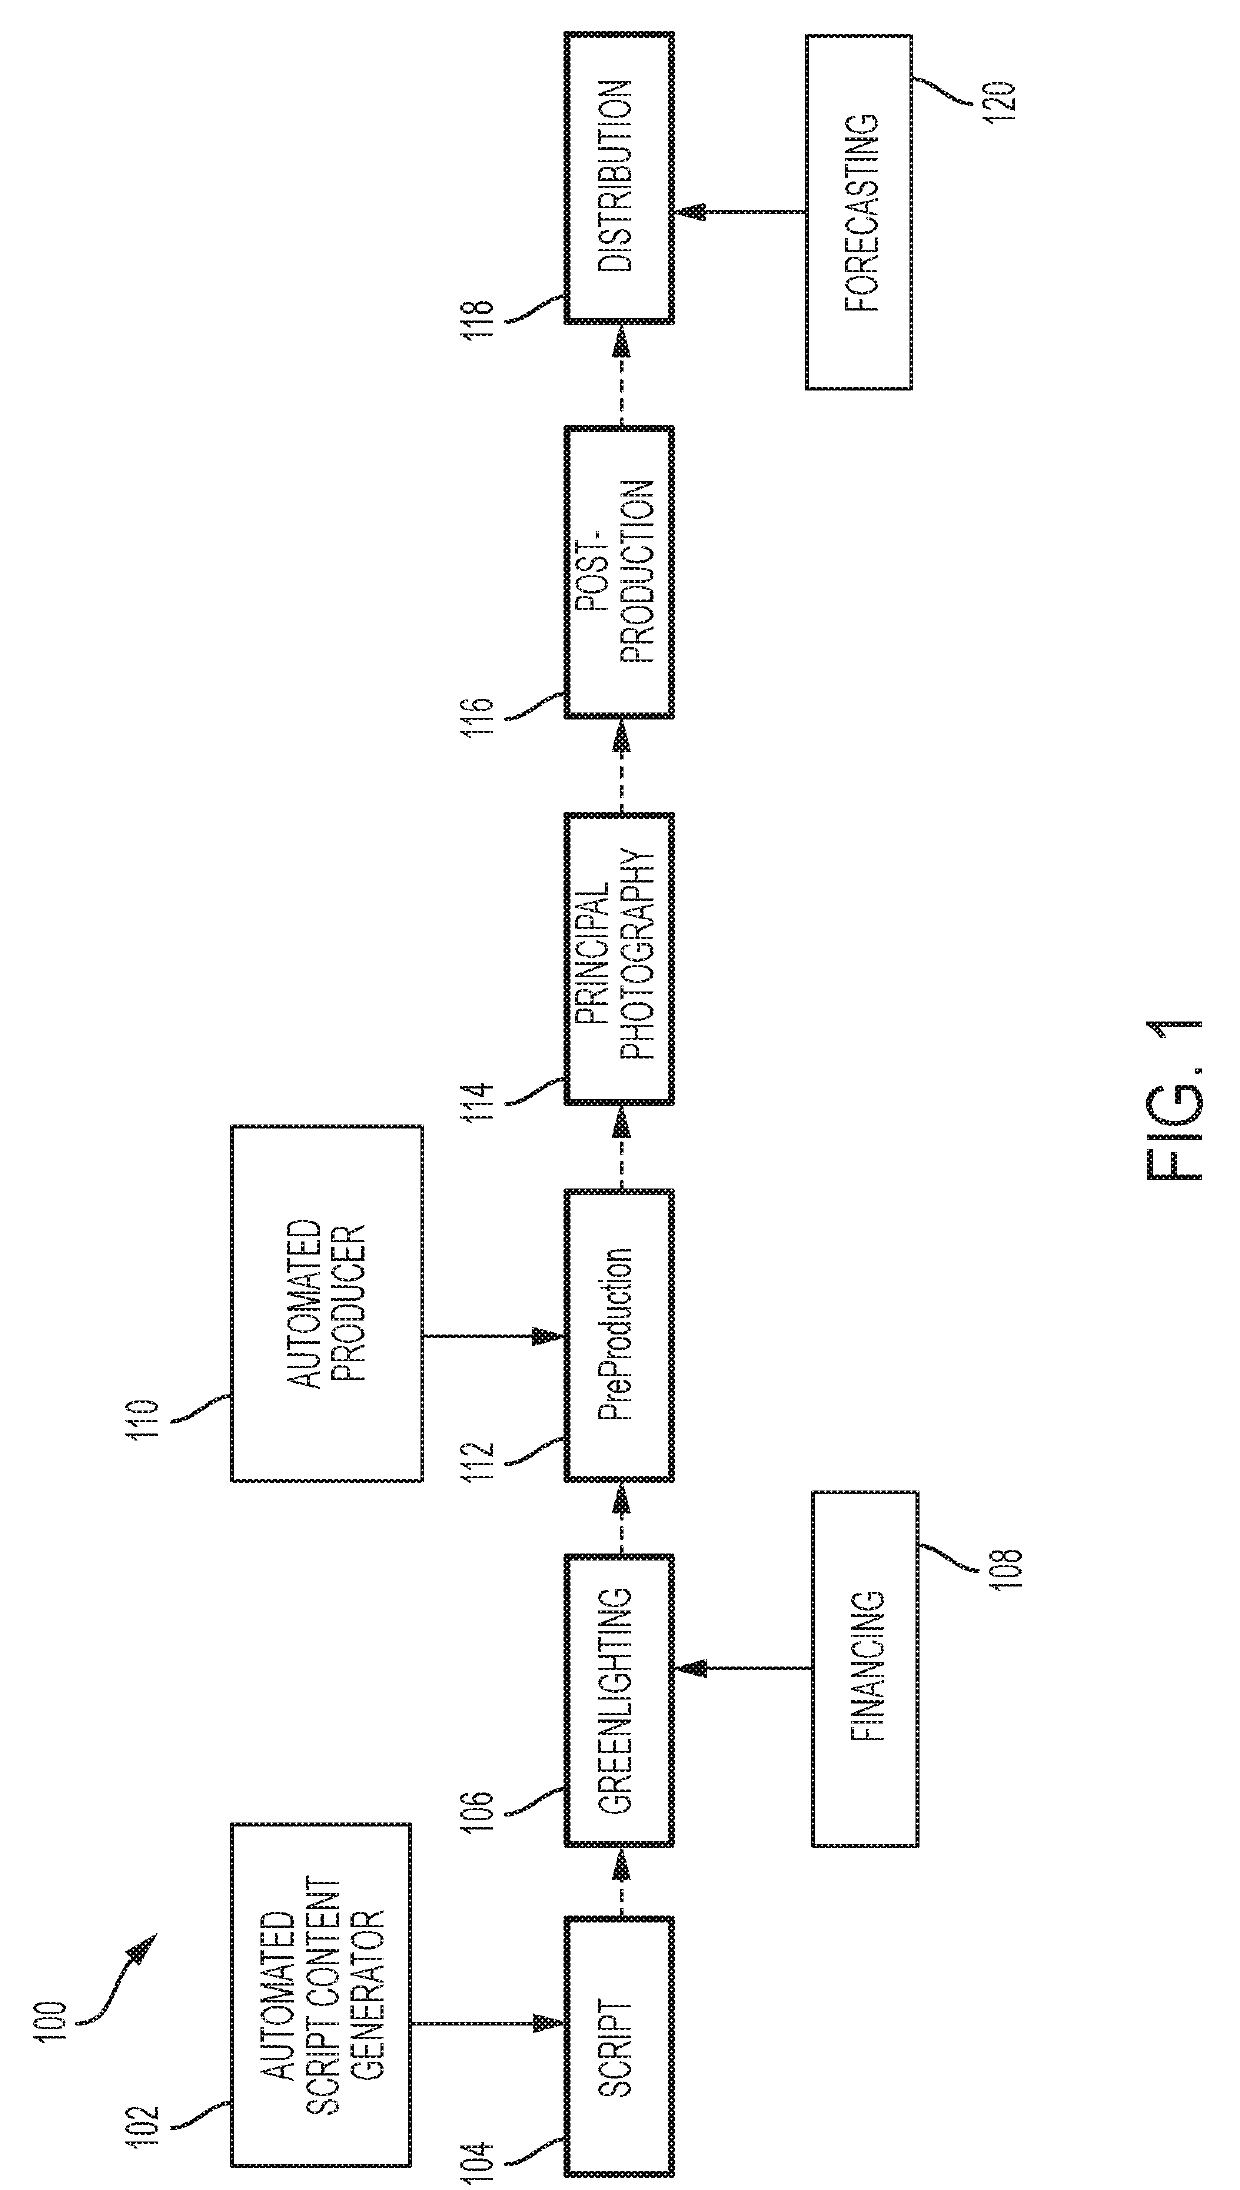 Script writing and content generation tools and improved operation of same